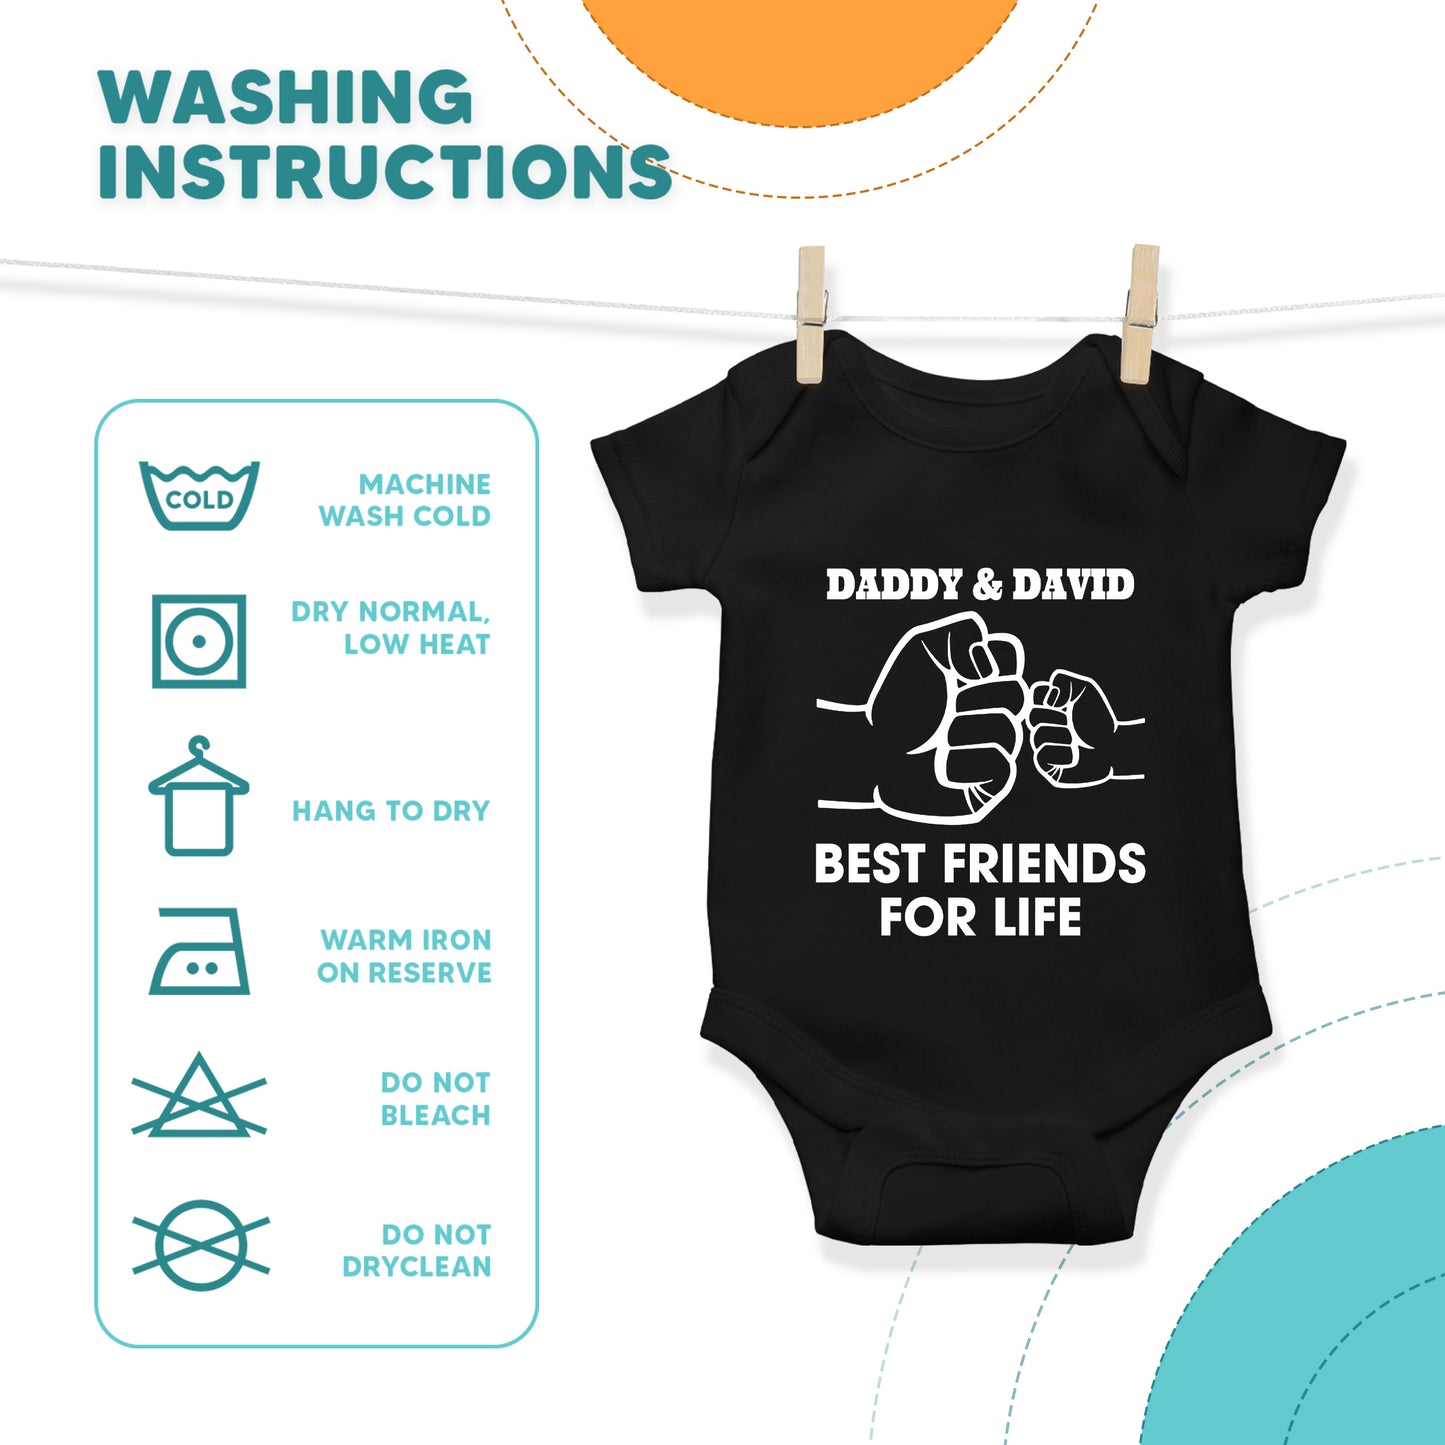 Best Friends For Life Daddy & Baby Custom Matching Outfit